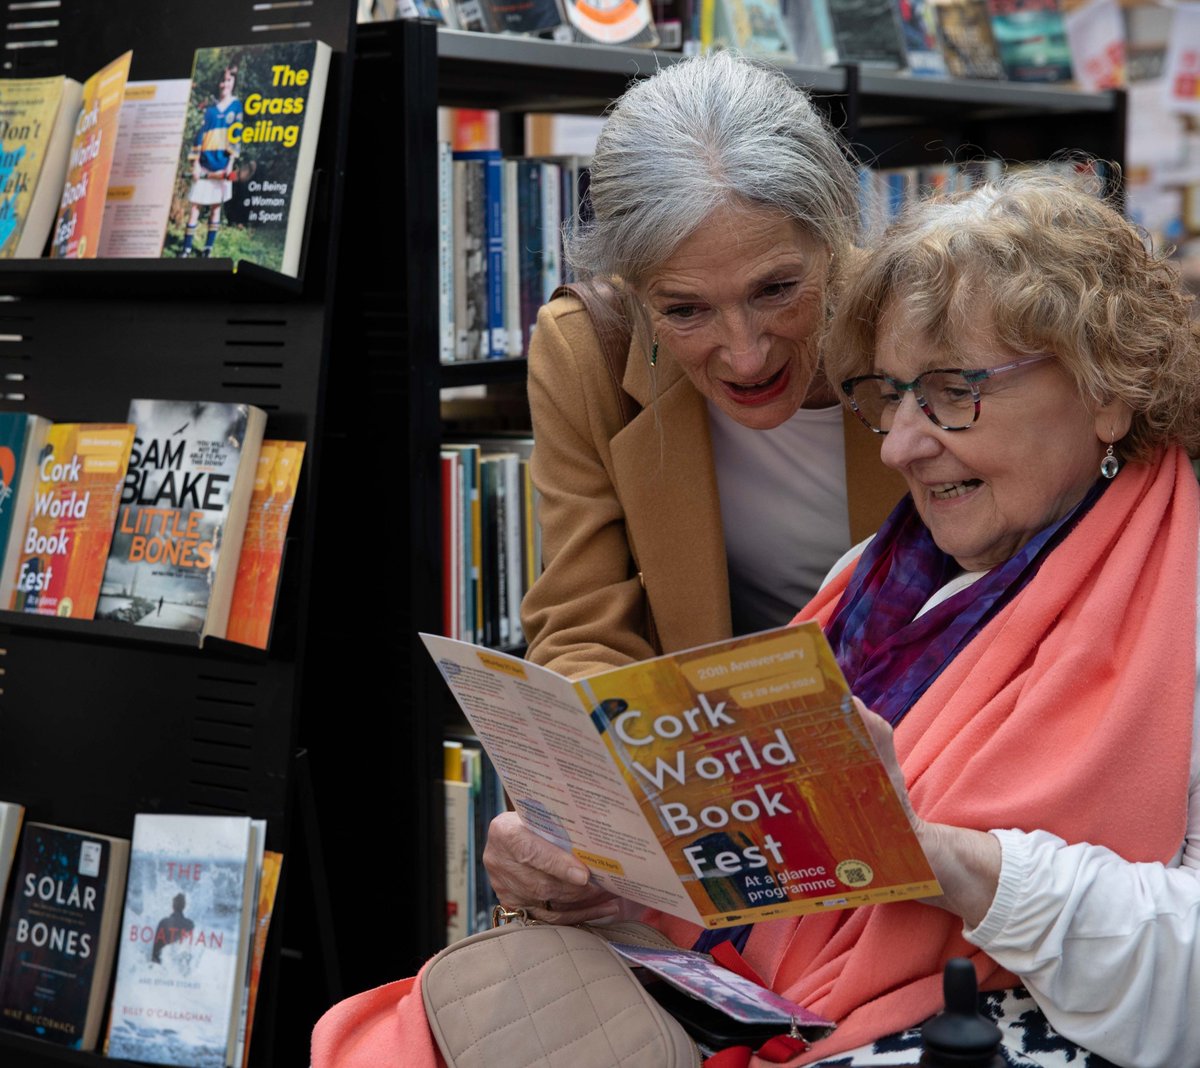 The City Library buzzed with activity during the Official Launch of the 20th Cork World Book Fest! 📚✨🎉 Irish writers Mary Morrissy, Evelyn Conlon, and Elaine Feeney, entertained the packed crowd of book enthusiasts with a fascinating discussion, moderated by Olivia O'Leary.